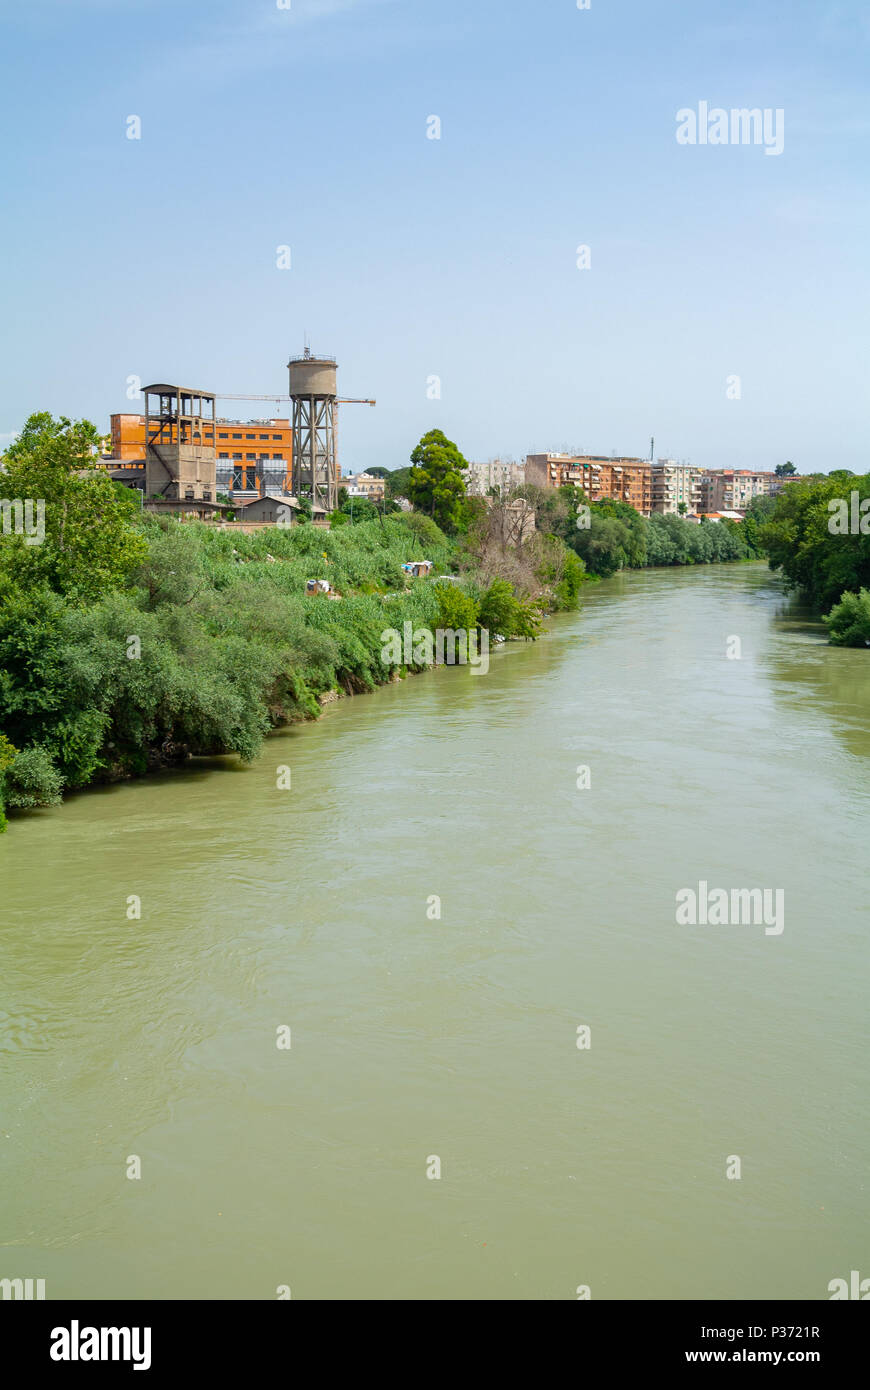 Industrial area along Tiber river, Ostiense, Rome, Italy Stock Photo